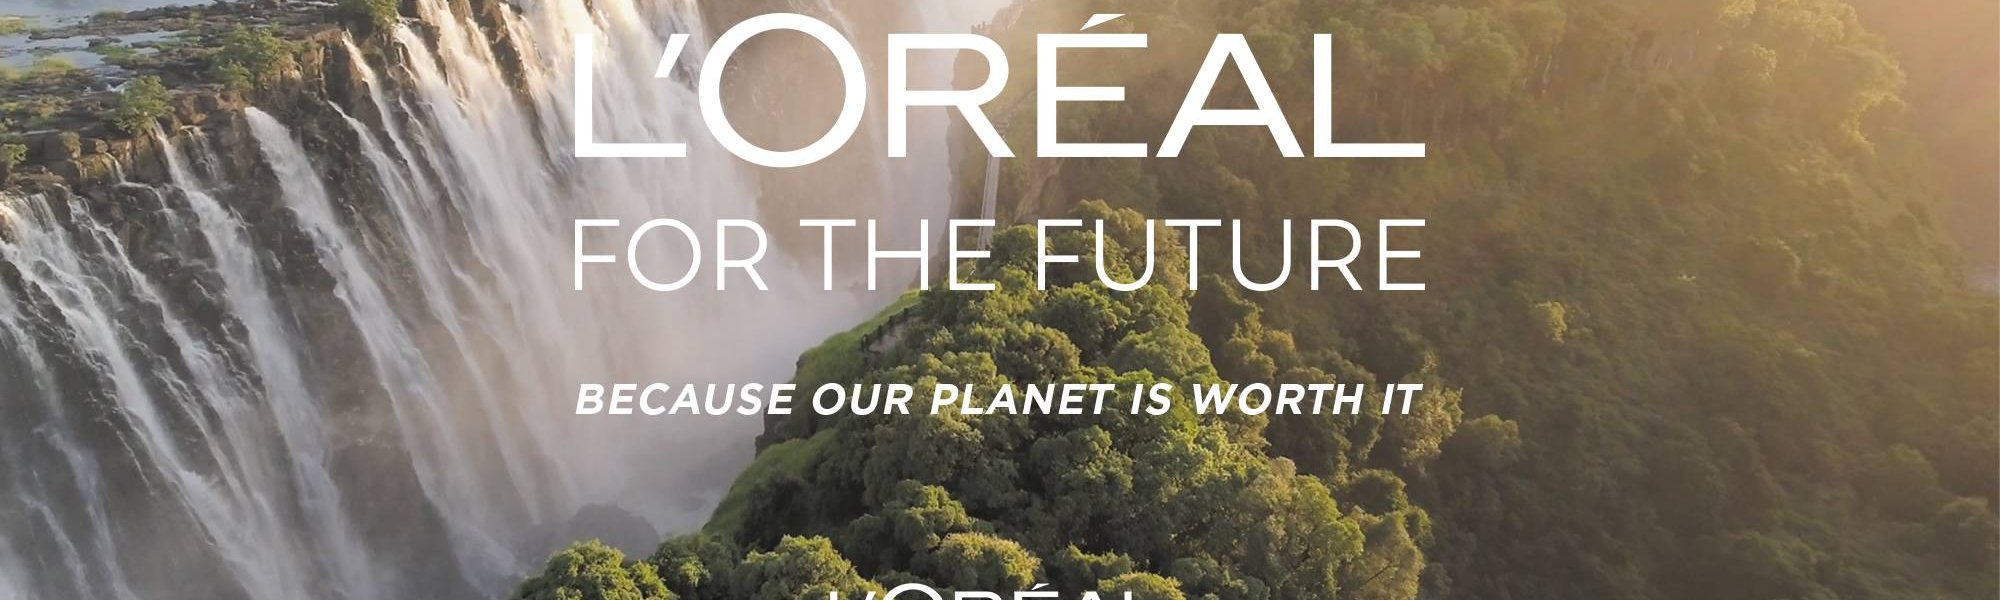 L'Oréal for the future - Because our planet is worth it